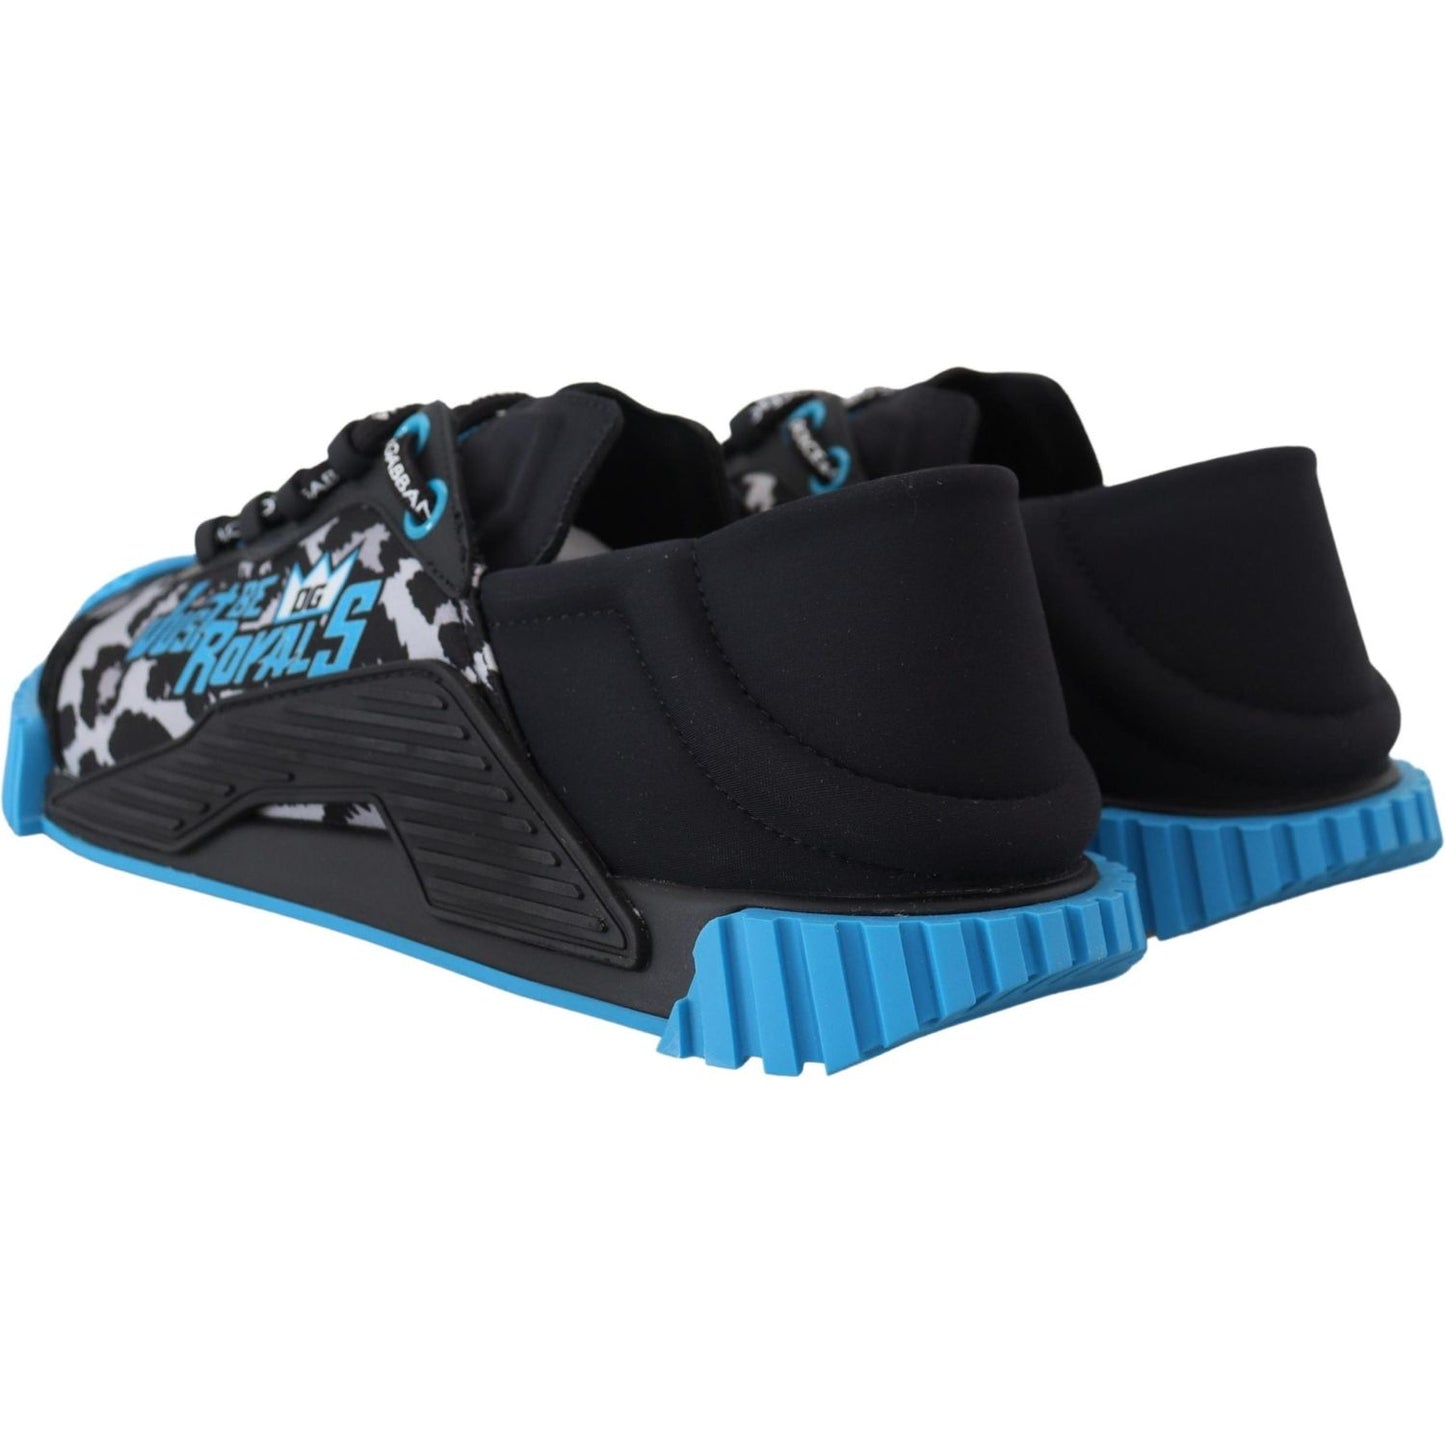 Dolce & Gabbana Elegant Black NS1 Leather Sneakers black-blue-fabric-lace-up-ns1-sneakers